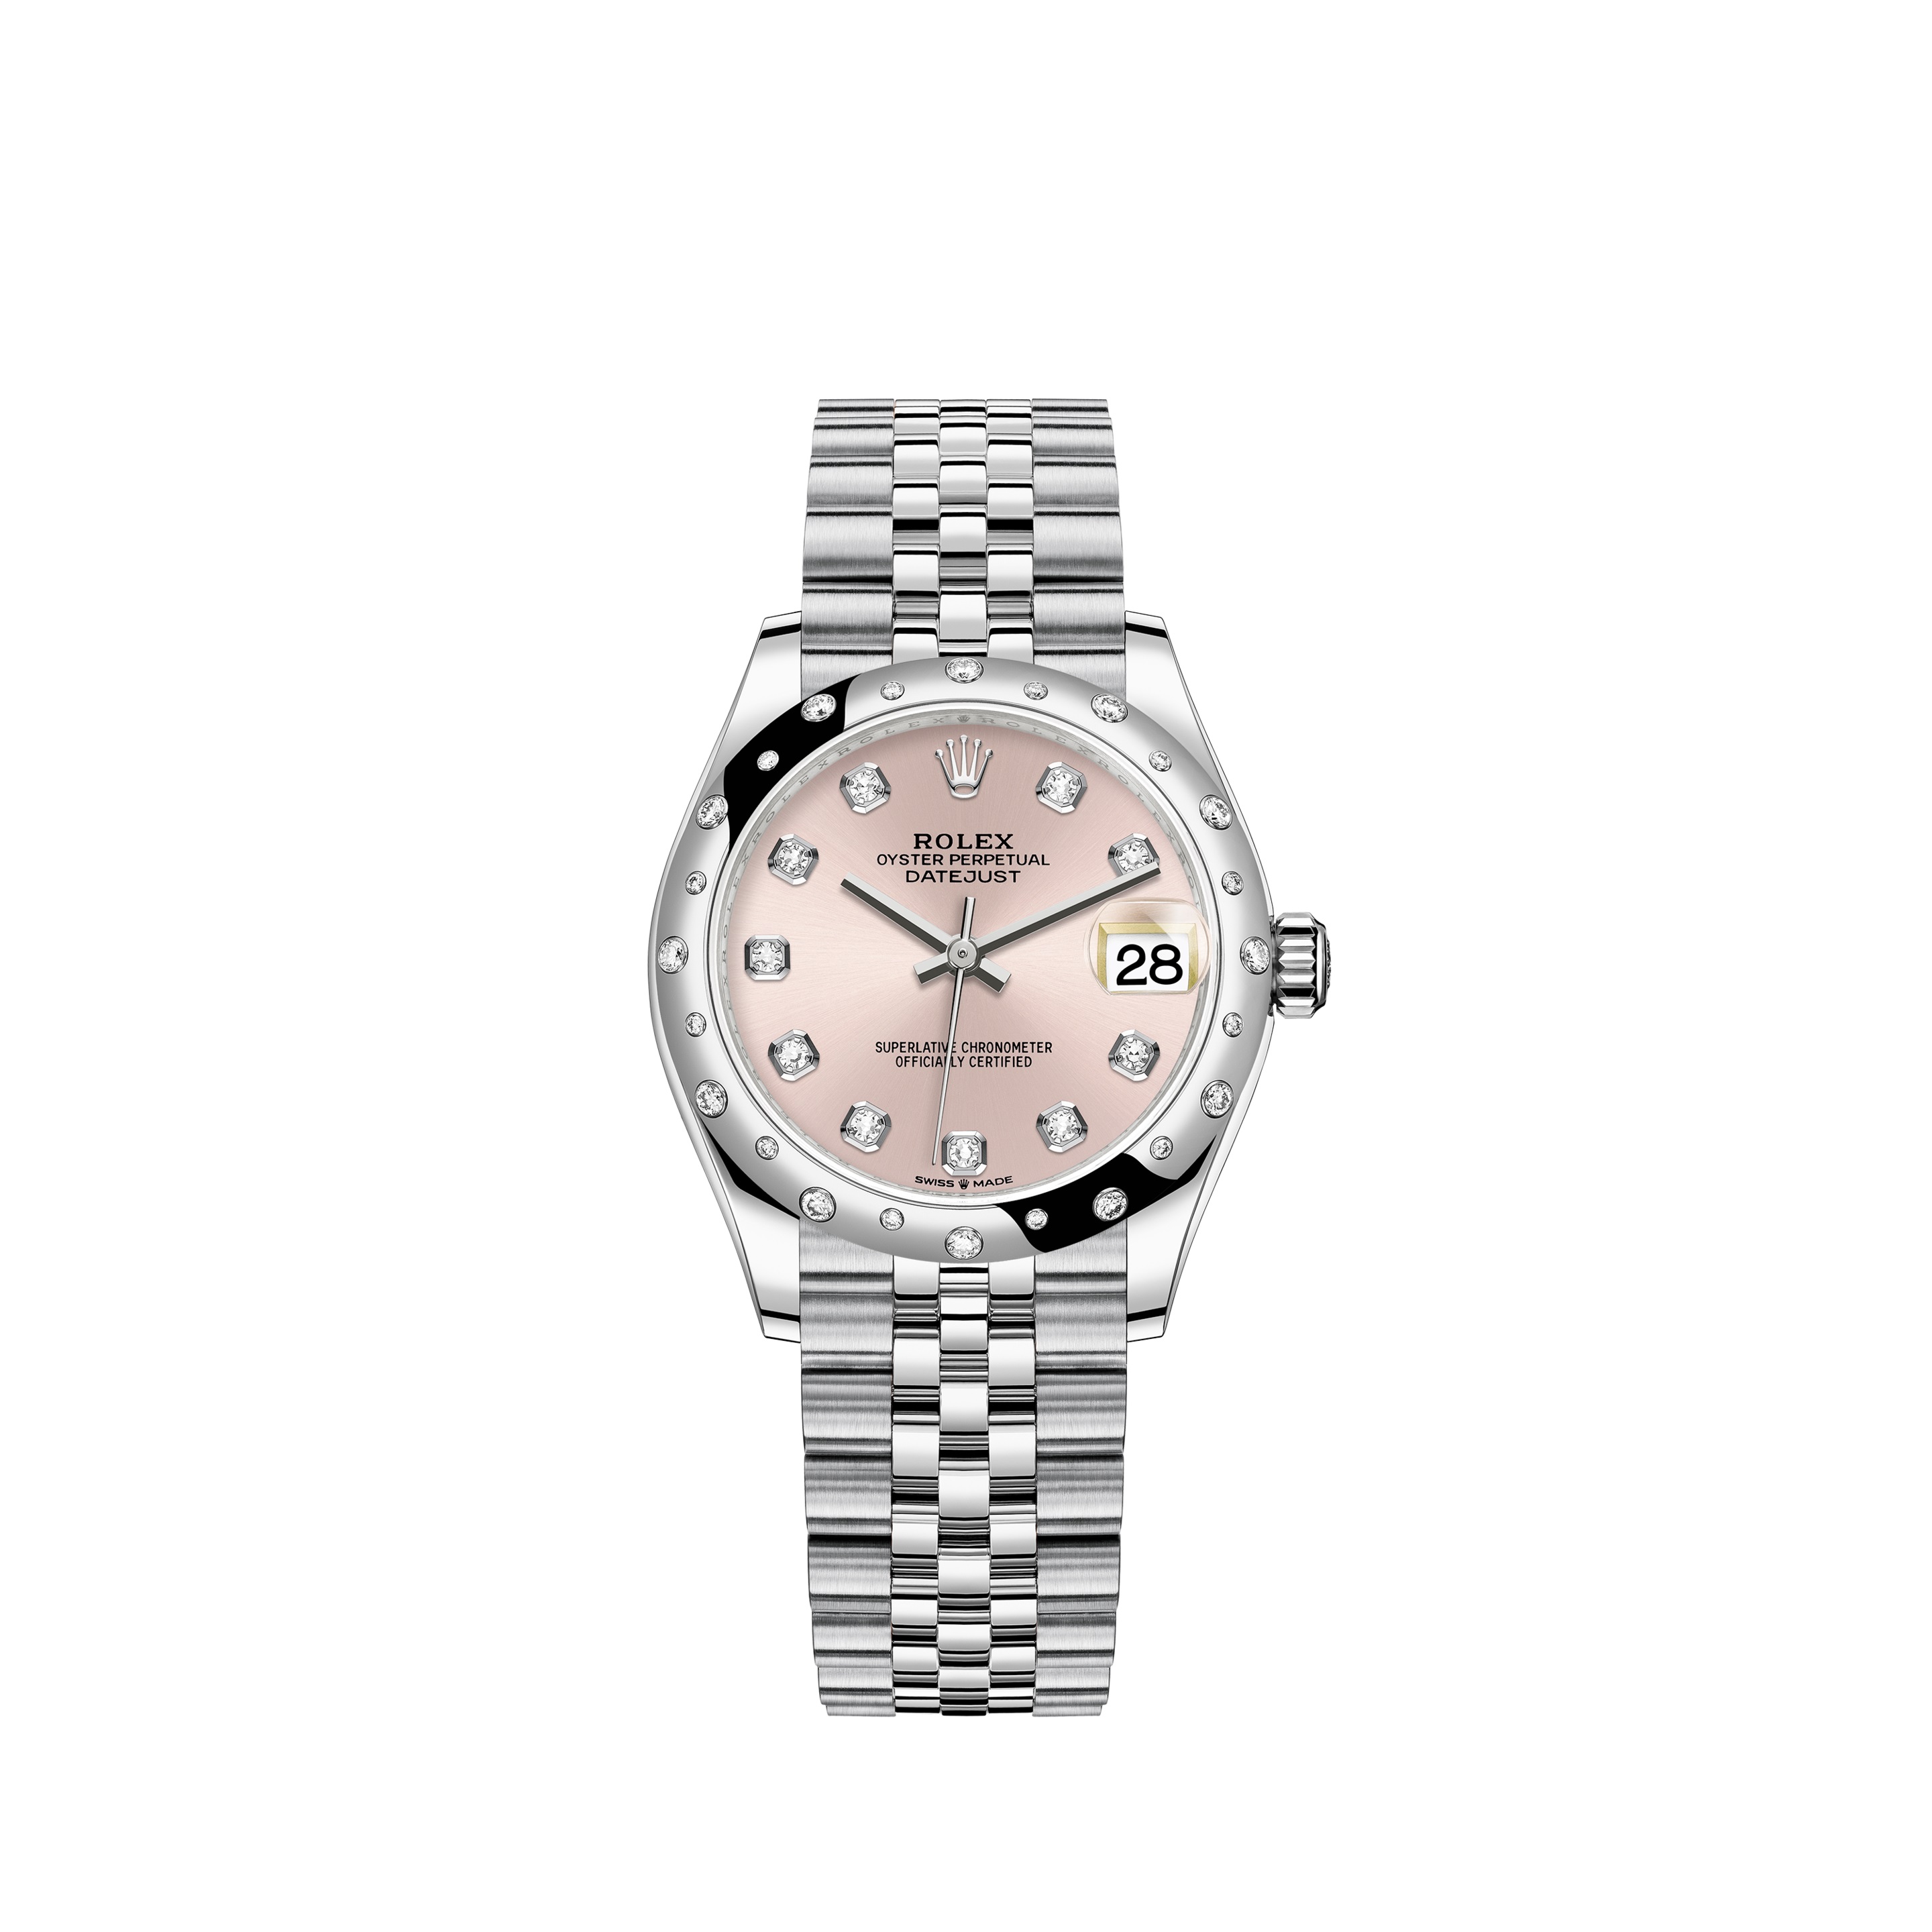 Datejust 31 278344RBR White Gold & Stainless Steel Watch (Pink Set with Diamonds)